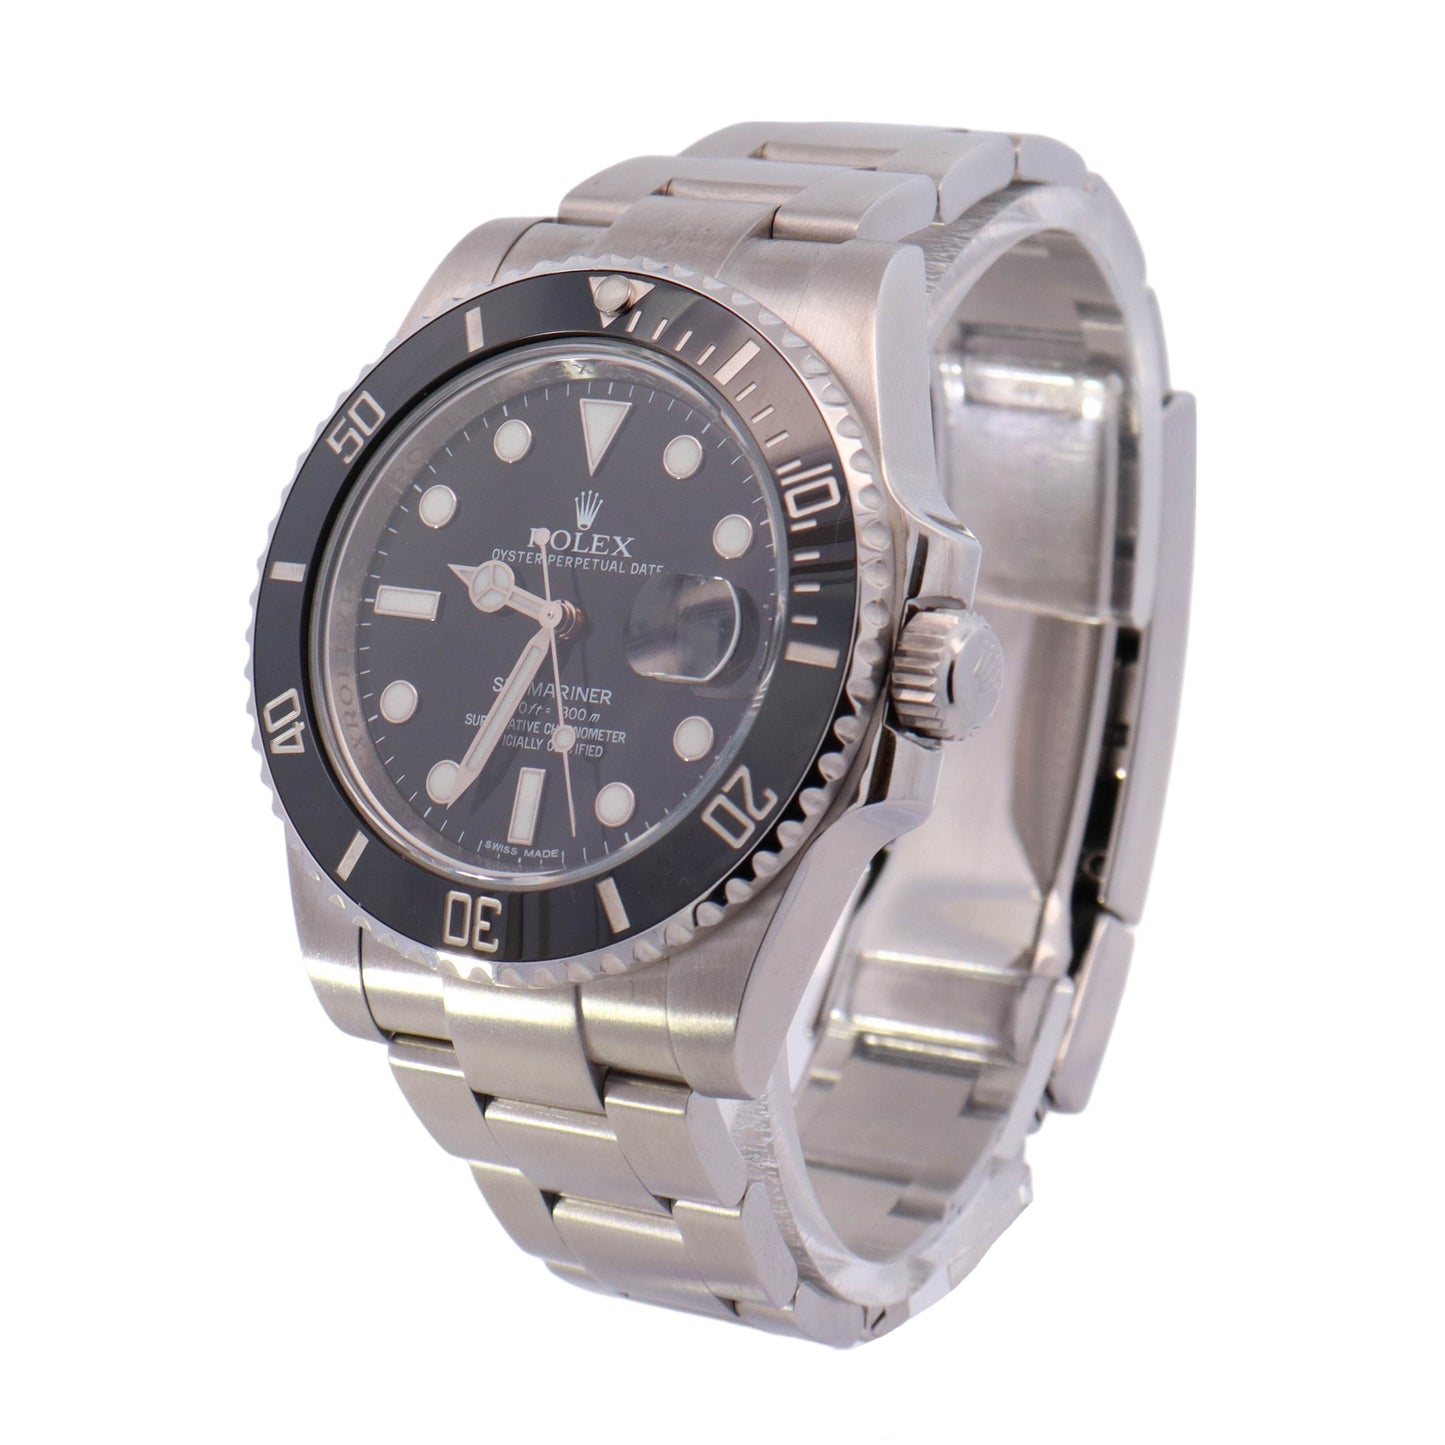 Rolex Submariner Stainless Steel 41mm Black Dot Dial Watch Reference #: 126610LN - Happy Jewelers Fine Jewelry Lifetime Warranty